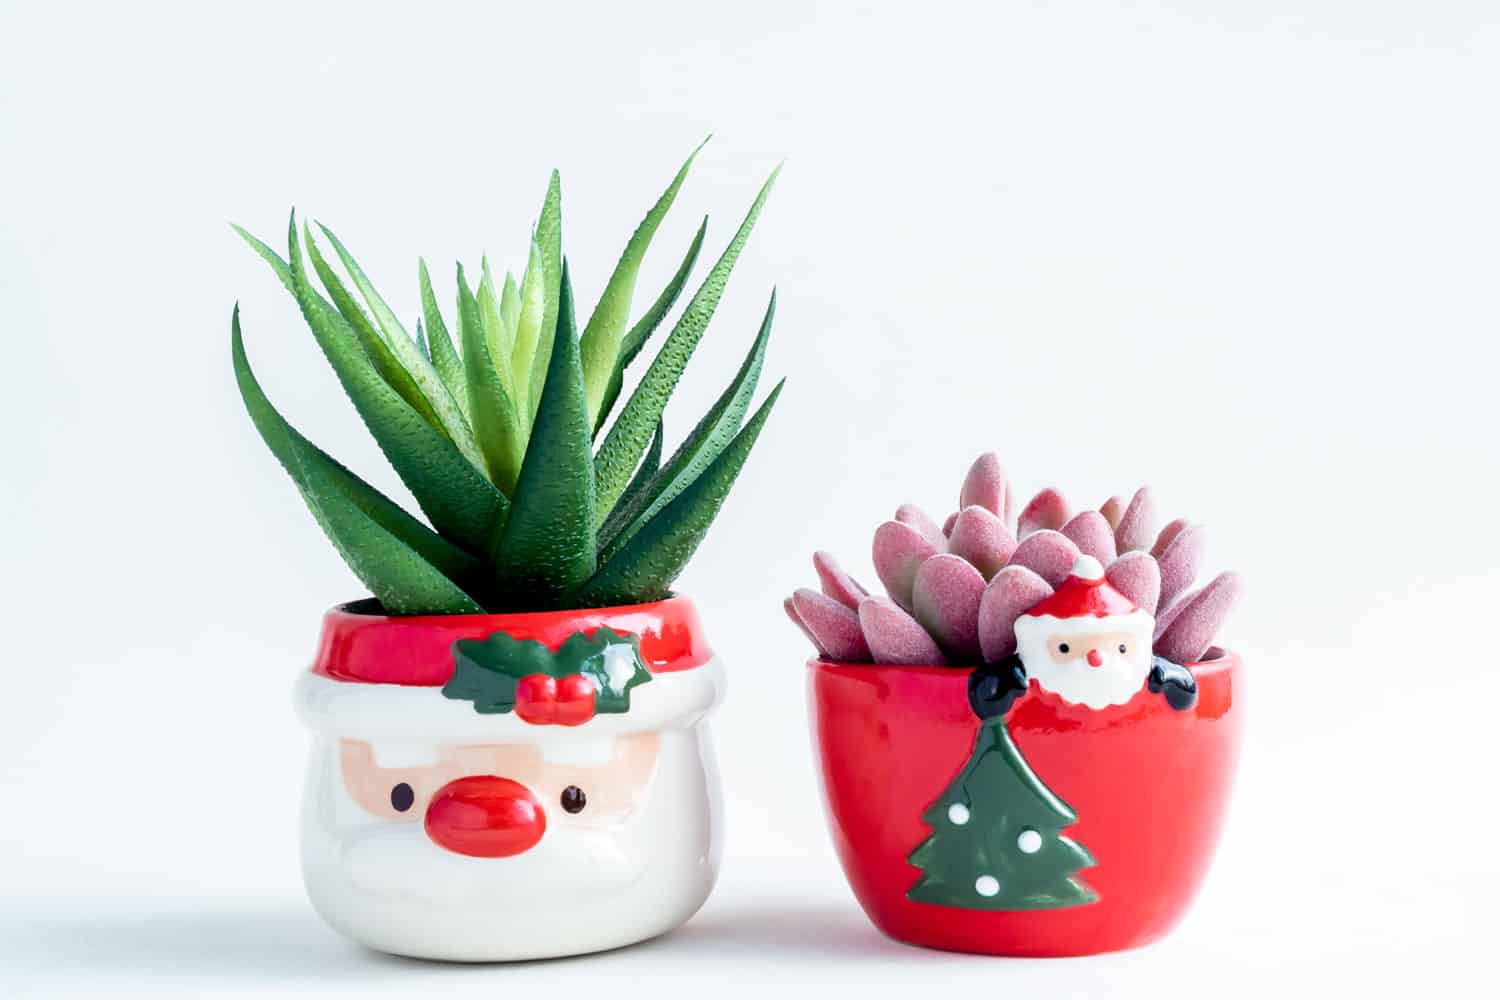 Two small succulent planted on a Christmas decor vase